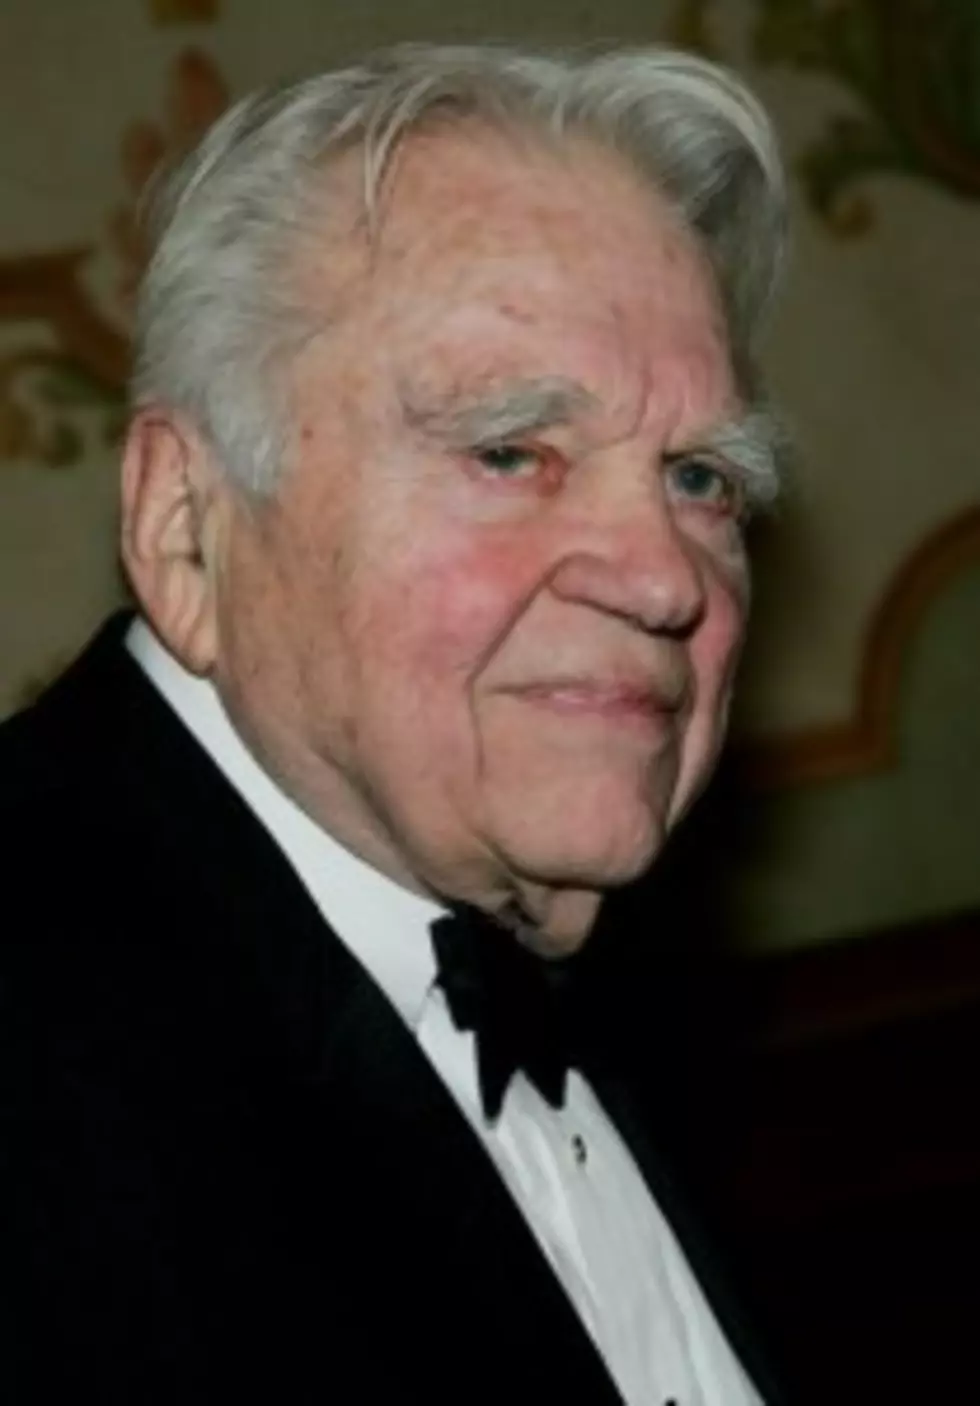 Andy Rooney From &#8217;60 Minutes&#8217; Dies at 92